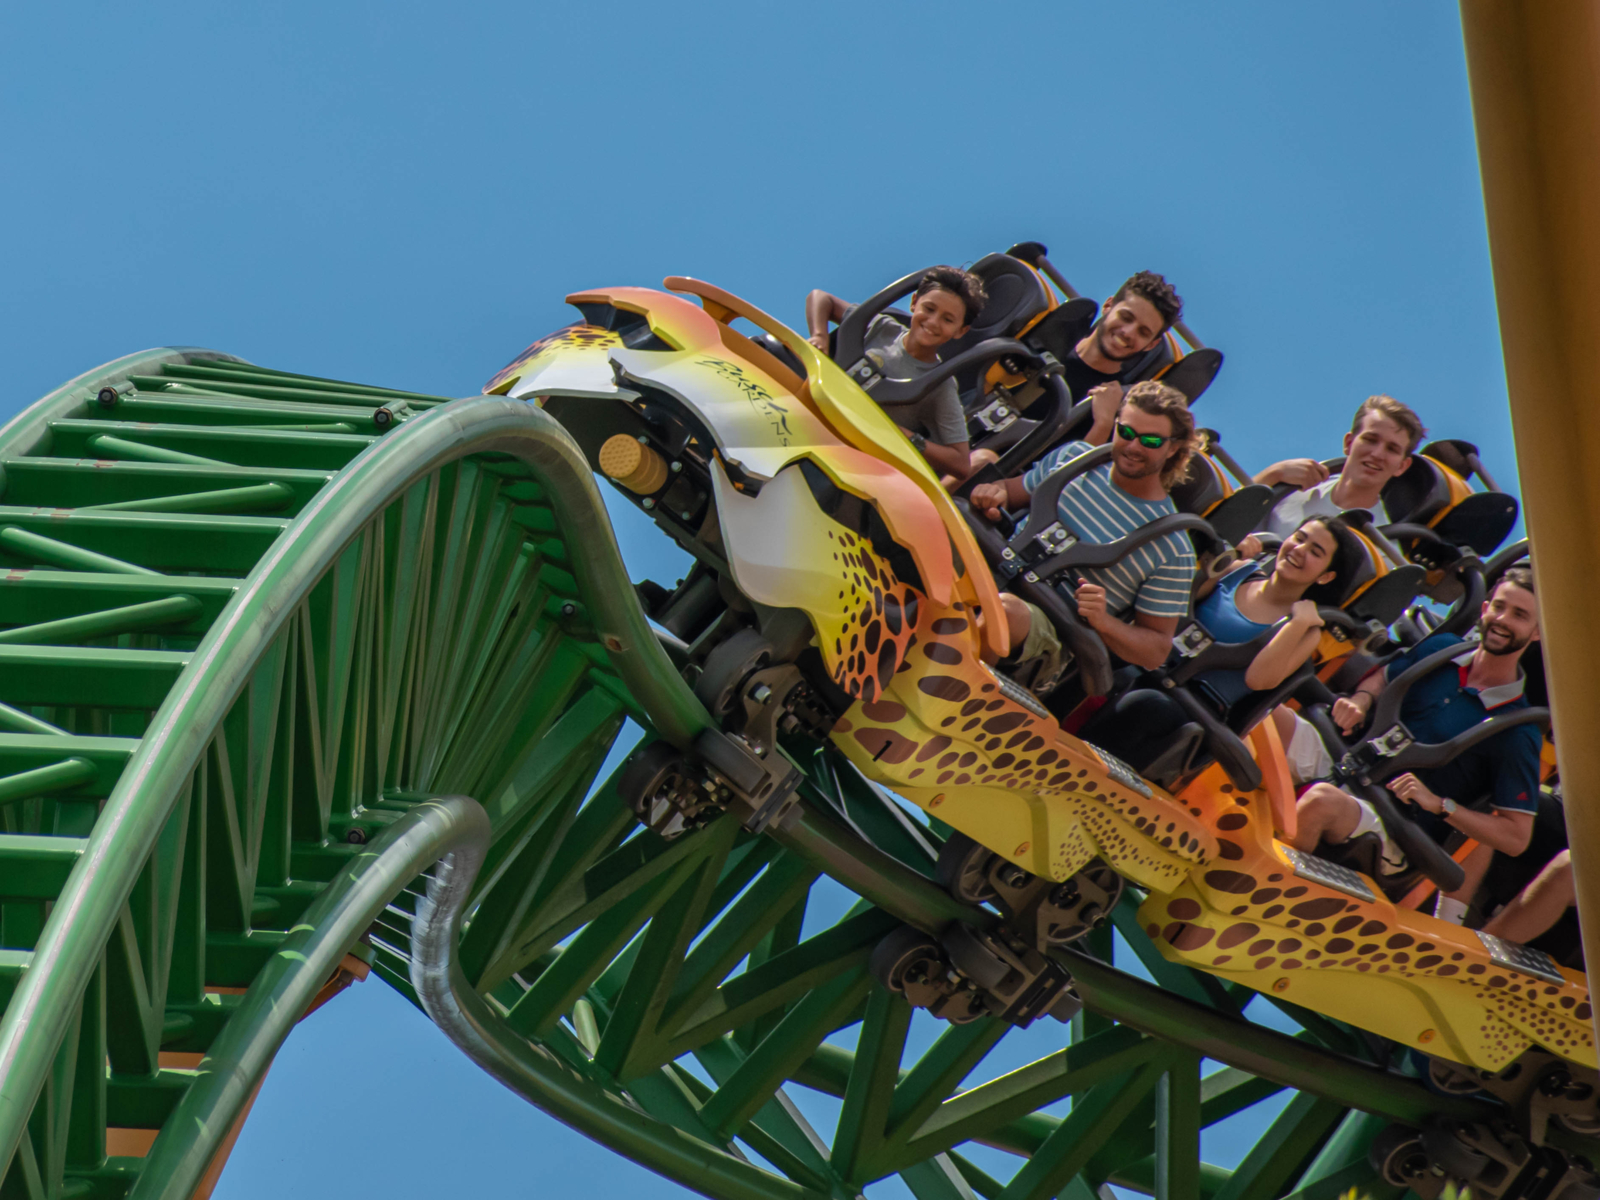 Bunch of folks riding a roller coaster in Busch Gardens, one of the best things to do in Tampa, Florida